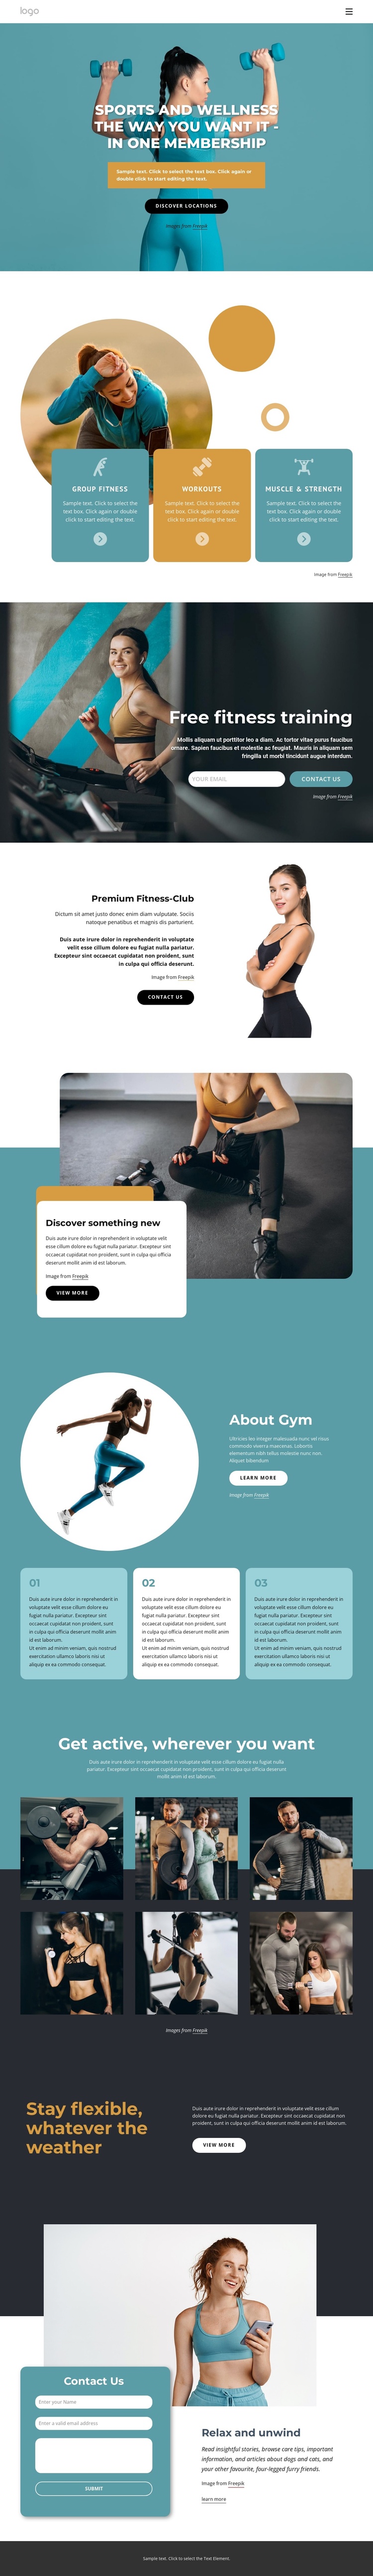 Workout anywhere with one membership Joomla Template